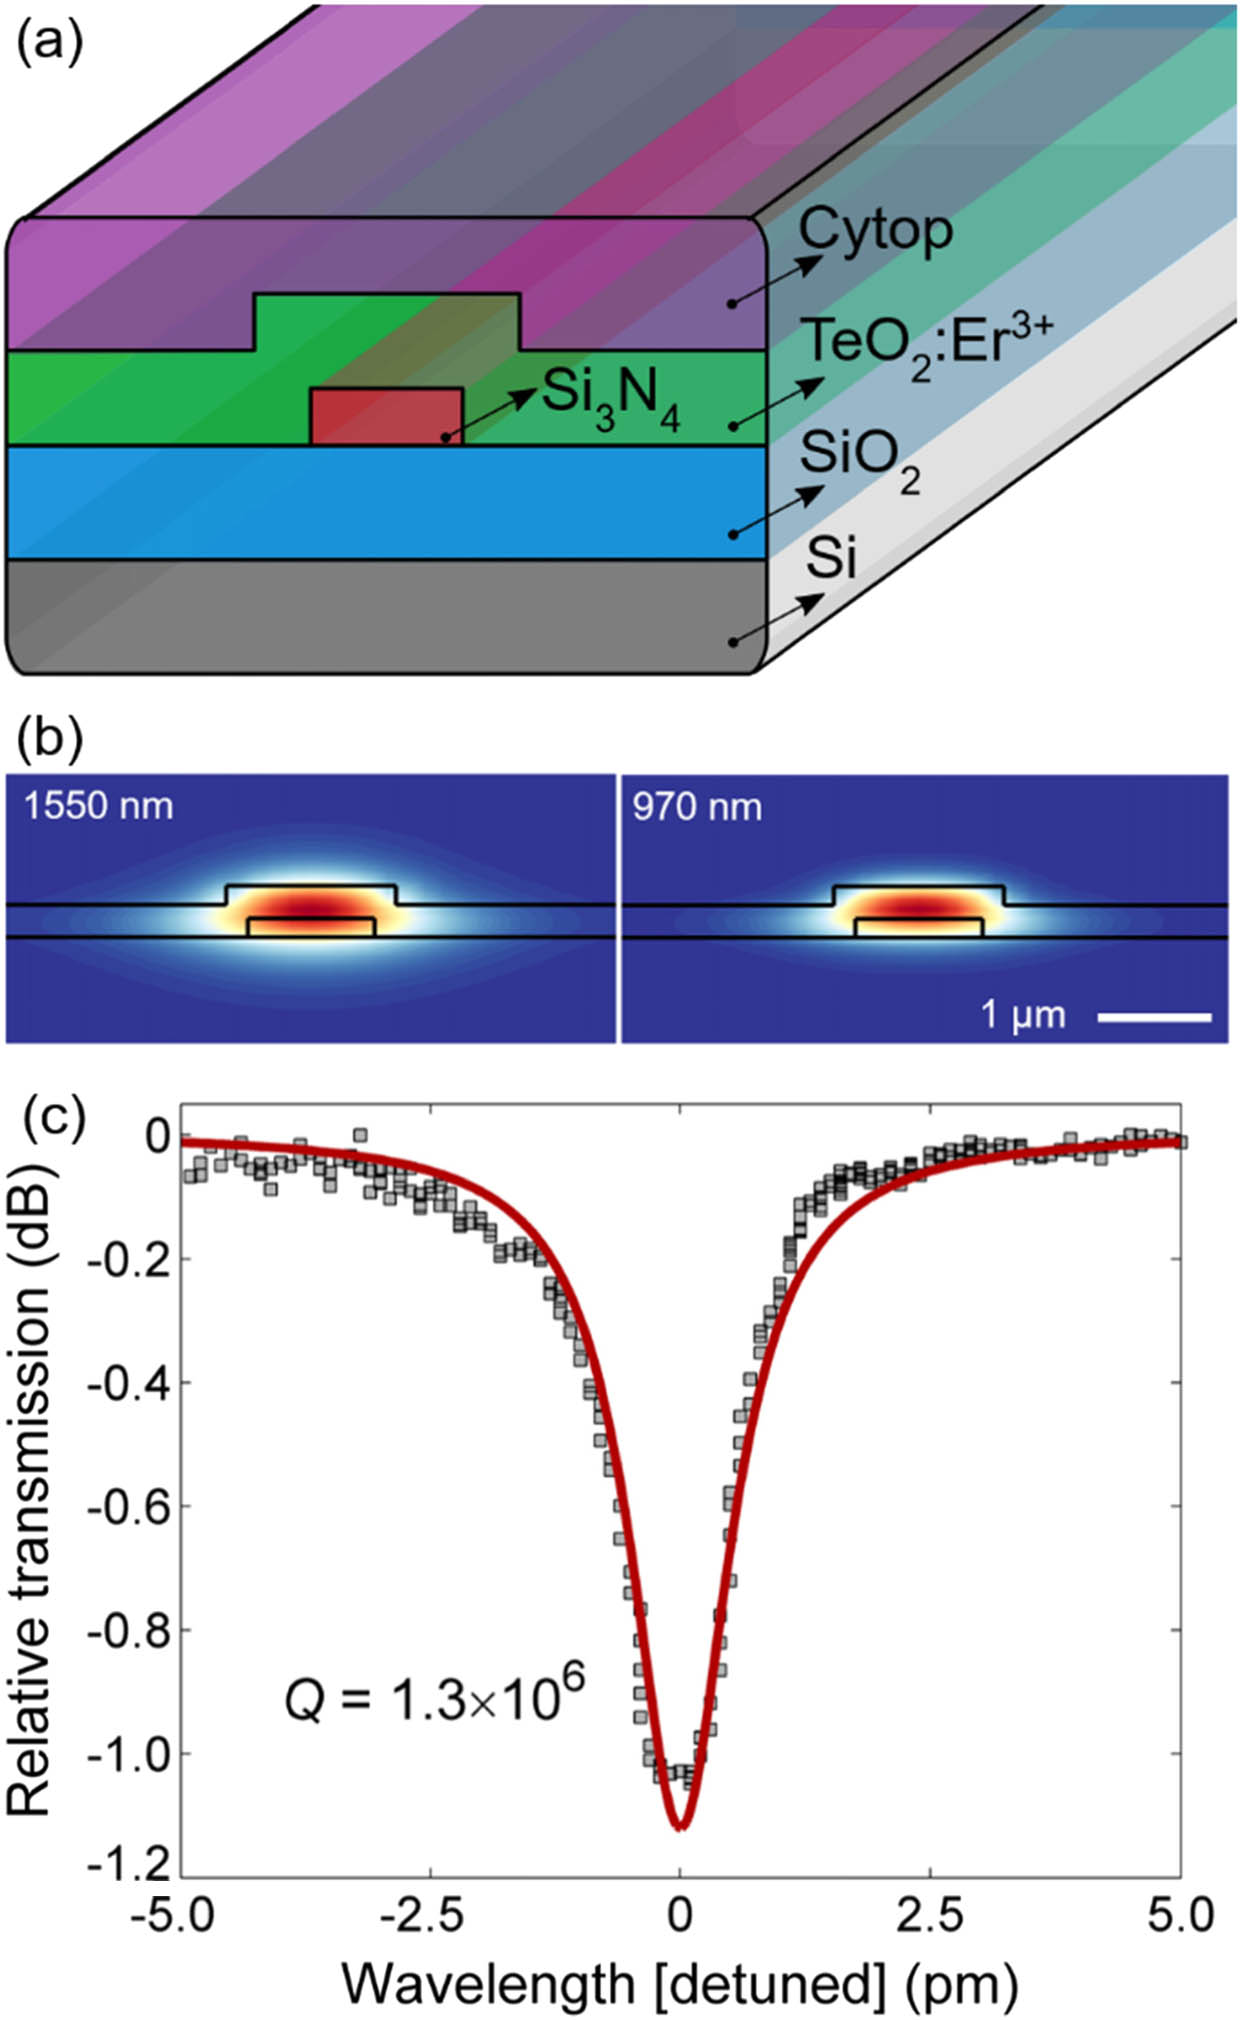 (a) Diagram of the TeO2:Er3+-coated Si3N4 waveguide structure. (b) Calculated optical electric-field profile for the fundamental 1550 and 970 nm TE waveguide modes. (c) Resonance spectrum of a TeO2:Er3+-coated Si3N4 waveguide ring resonator with a 400 μm radius and 2.6 μm nominal gap at a wavelength of 1637 nm. The data is fit using coupled mode theory to extract an intrinsic Q factor of 1.3×106 corresponding to 0.25 dB/cm waveguide loss.